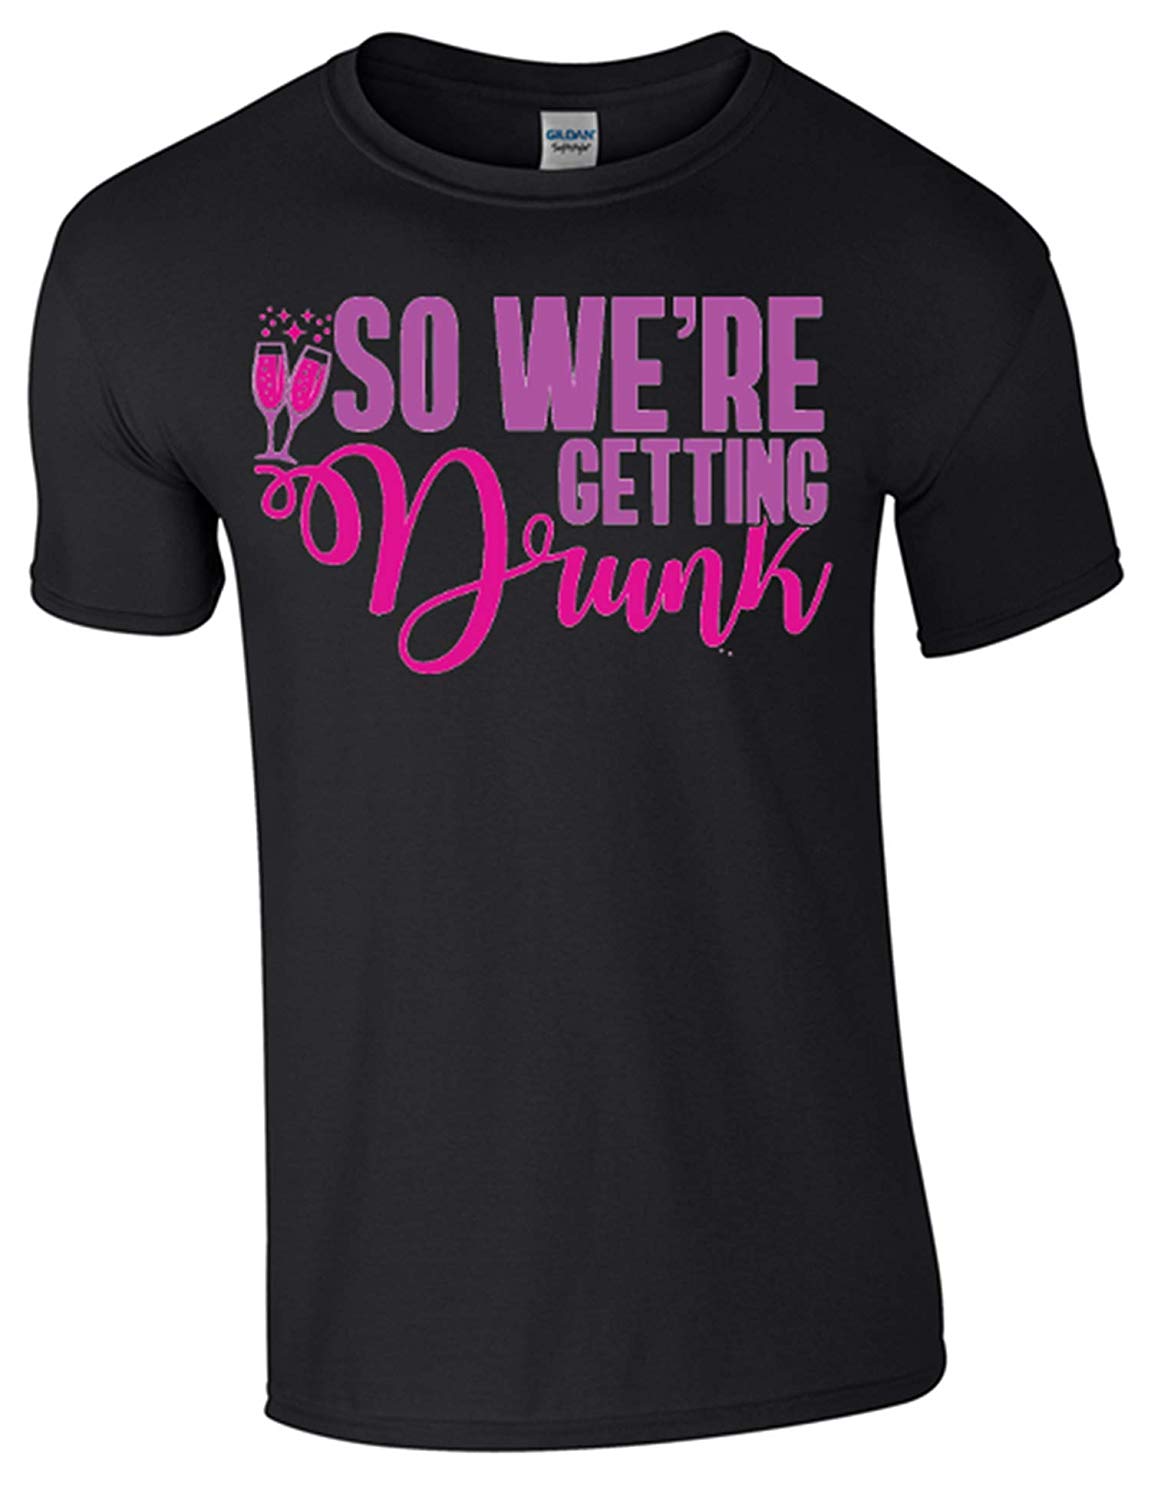 Army 1157 Kit Hen Party T-Shirts for Bride and Friends - Army 1157 kit Friends Black / 3XL Army 1157 Kit Veterans Owned Business